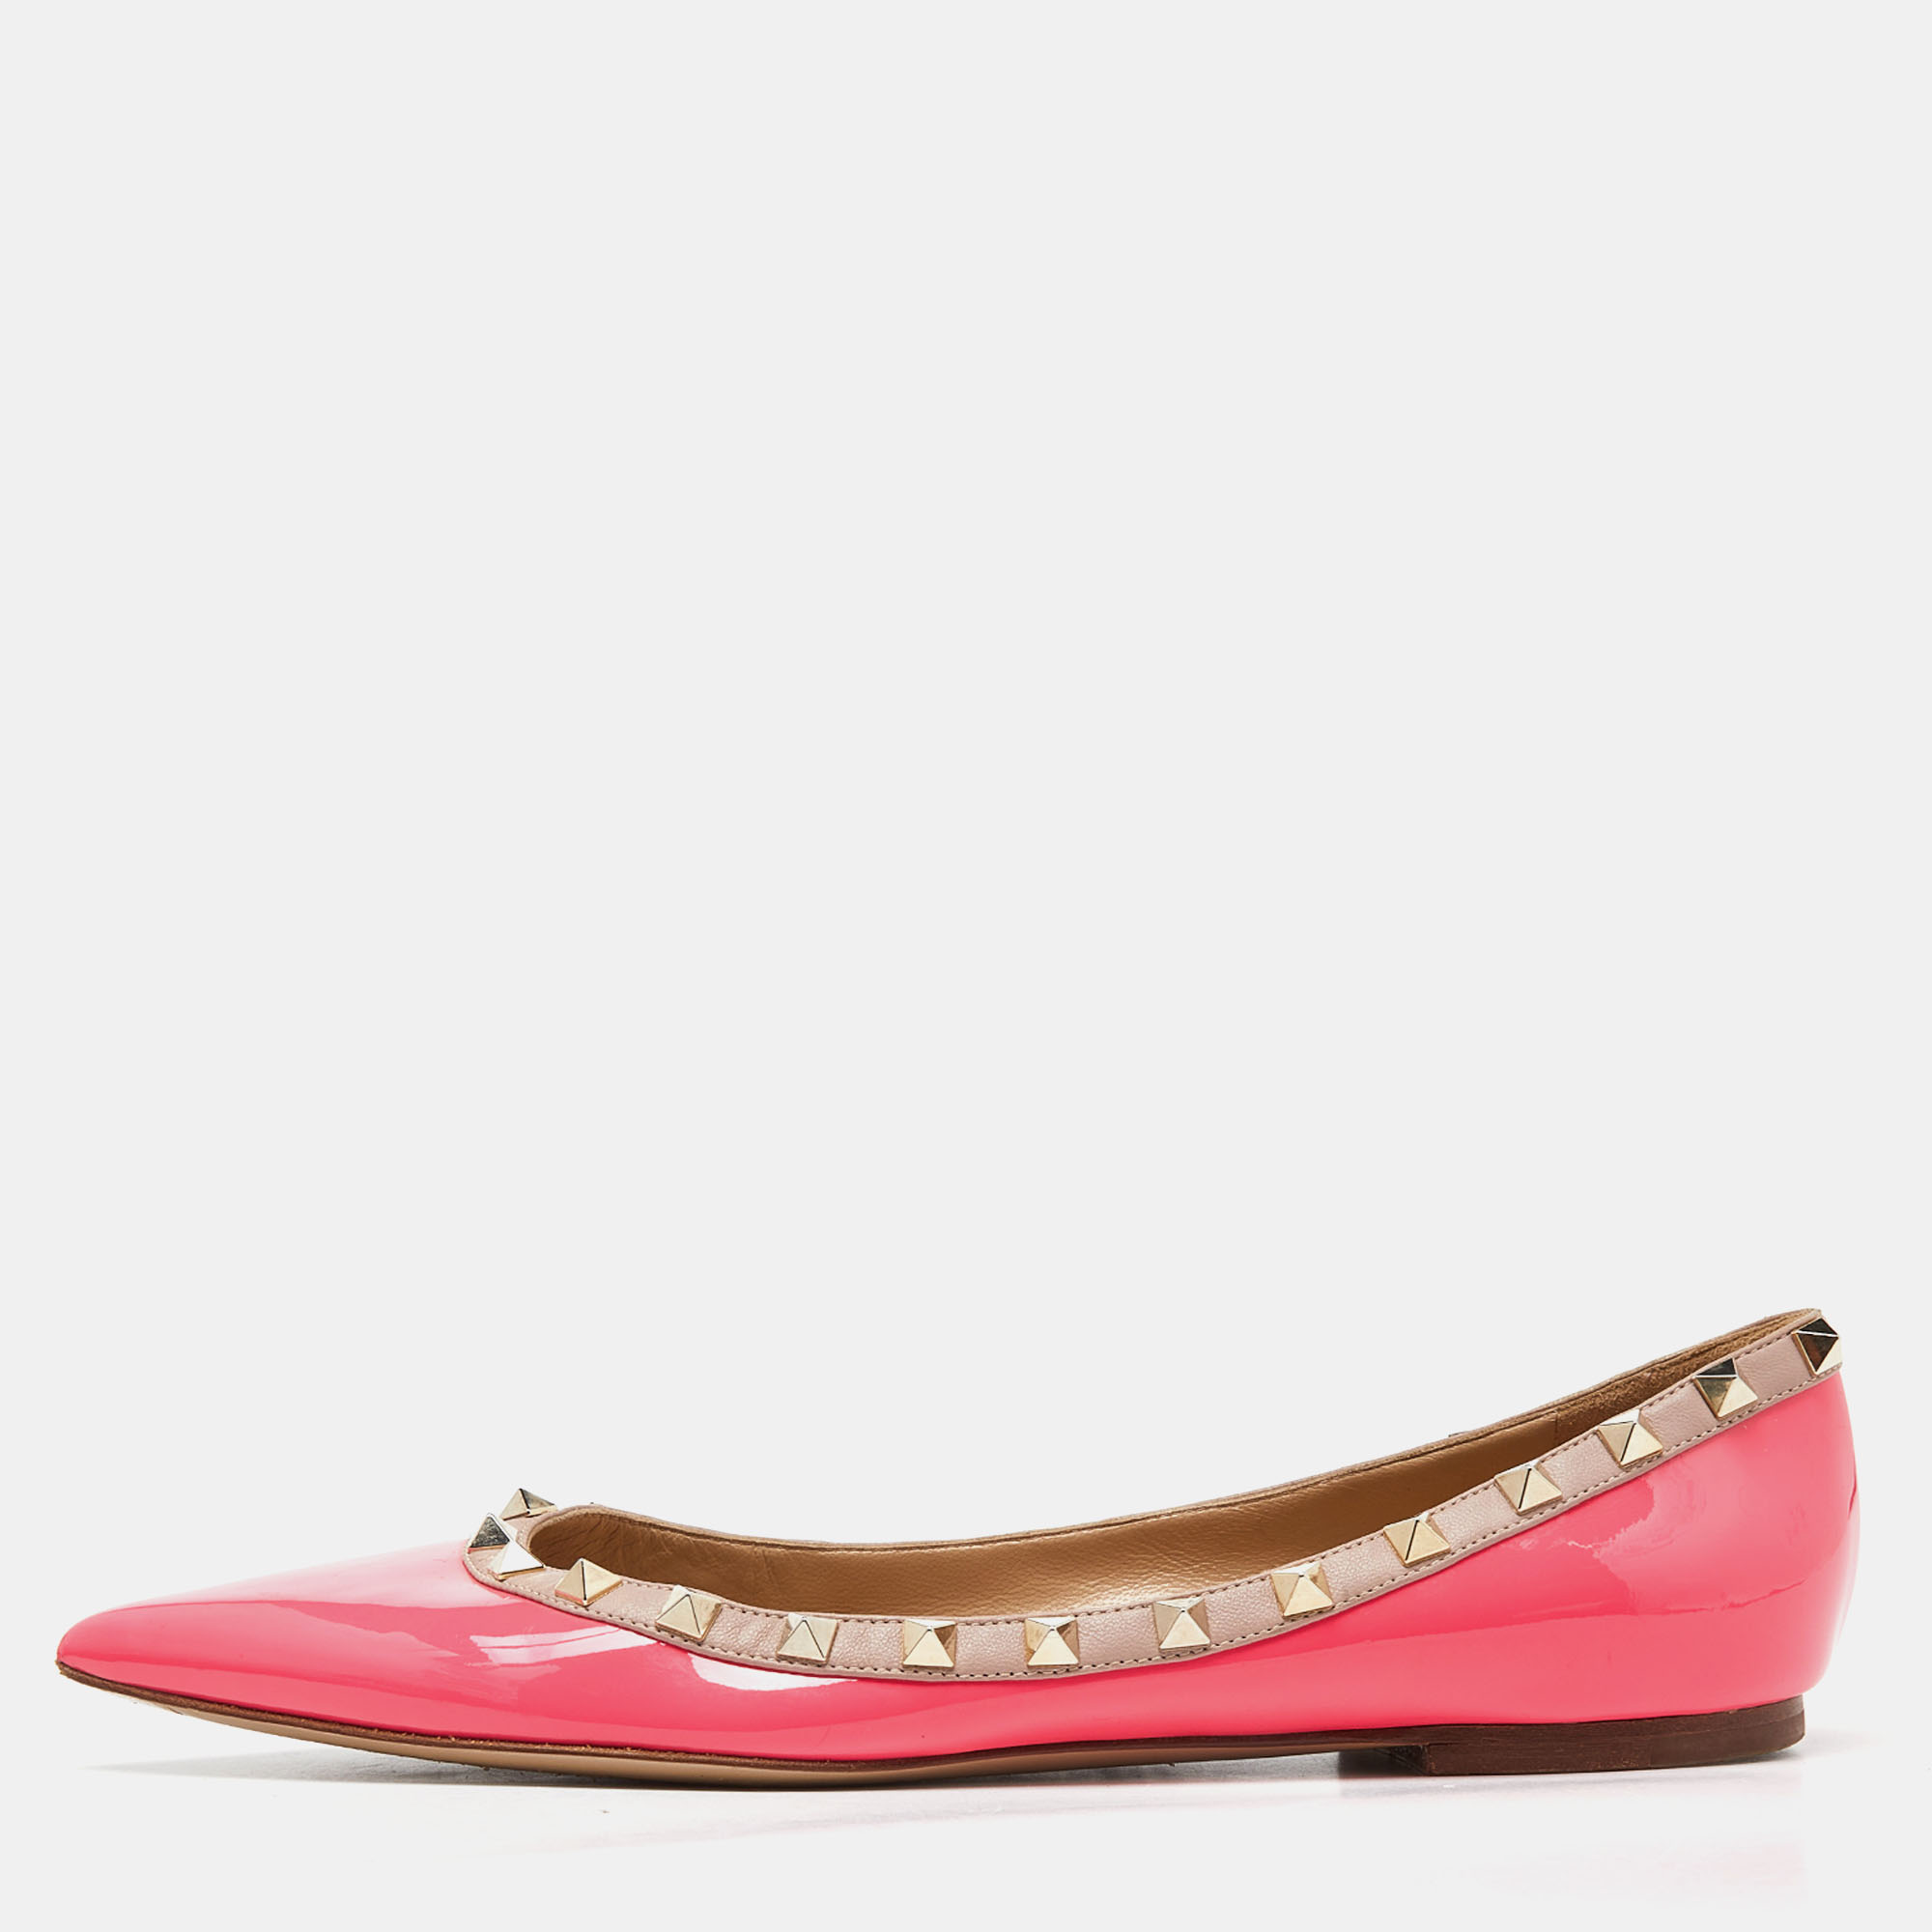 Valentino Pink/Beige Patent Leather Rockstud Pointed Toe Ballet Flats Size 40